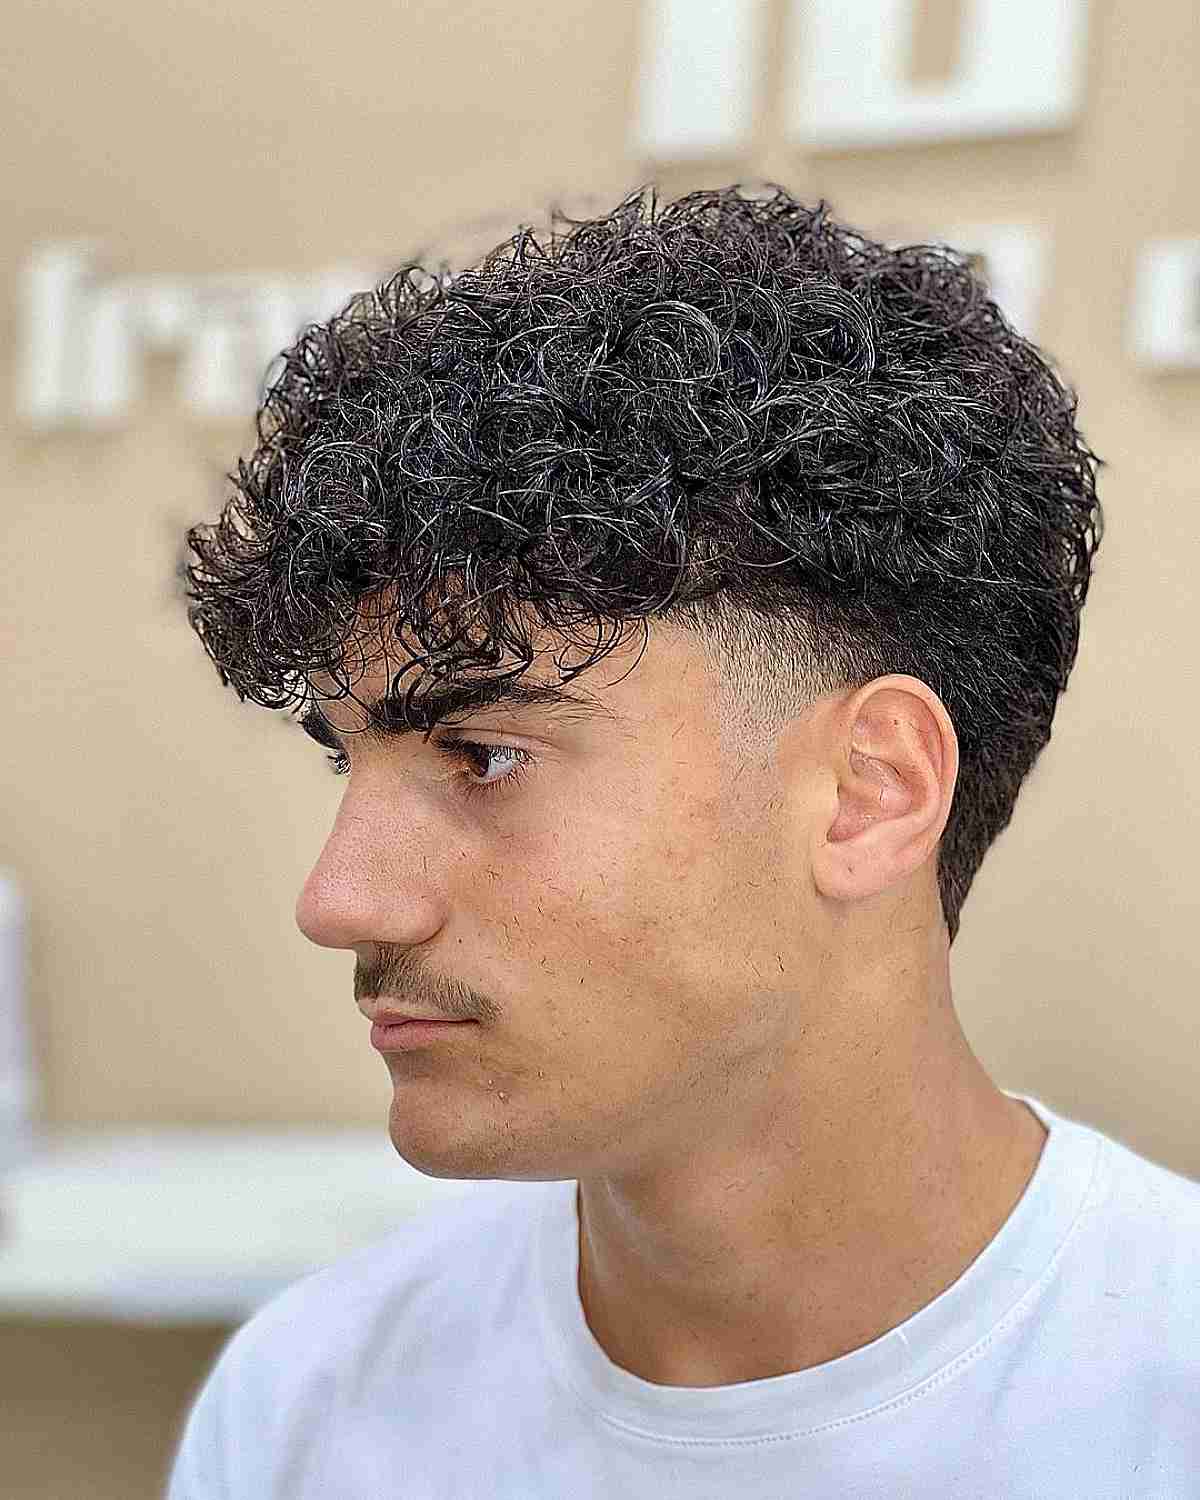 Curly taper fade haircut | Have curly hair? ✔️ Looking for a new trim for  2018? ✔️ Look no further than this 🔥 curly taper fade haircut! | By Regal  Gentleman | Facebook